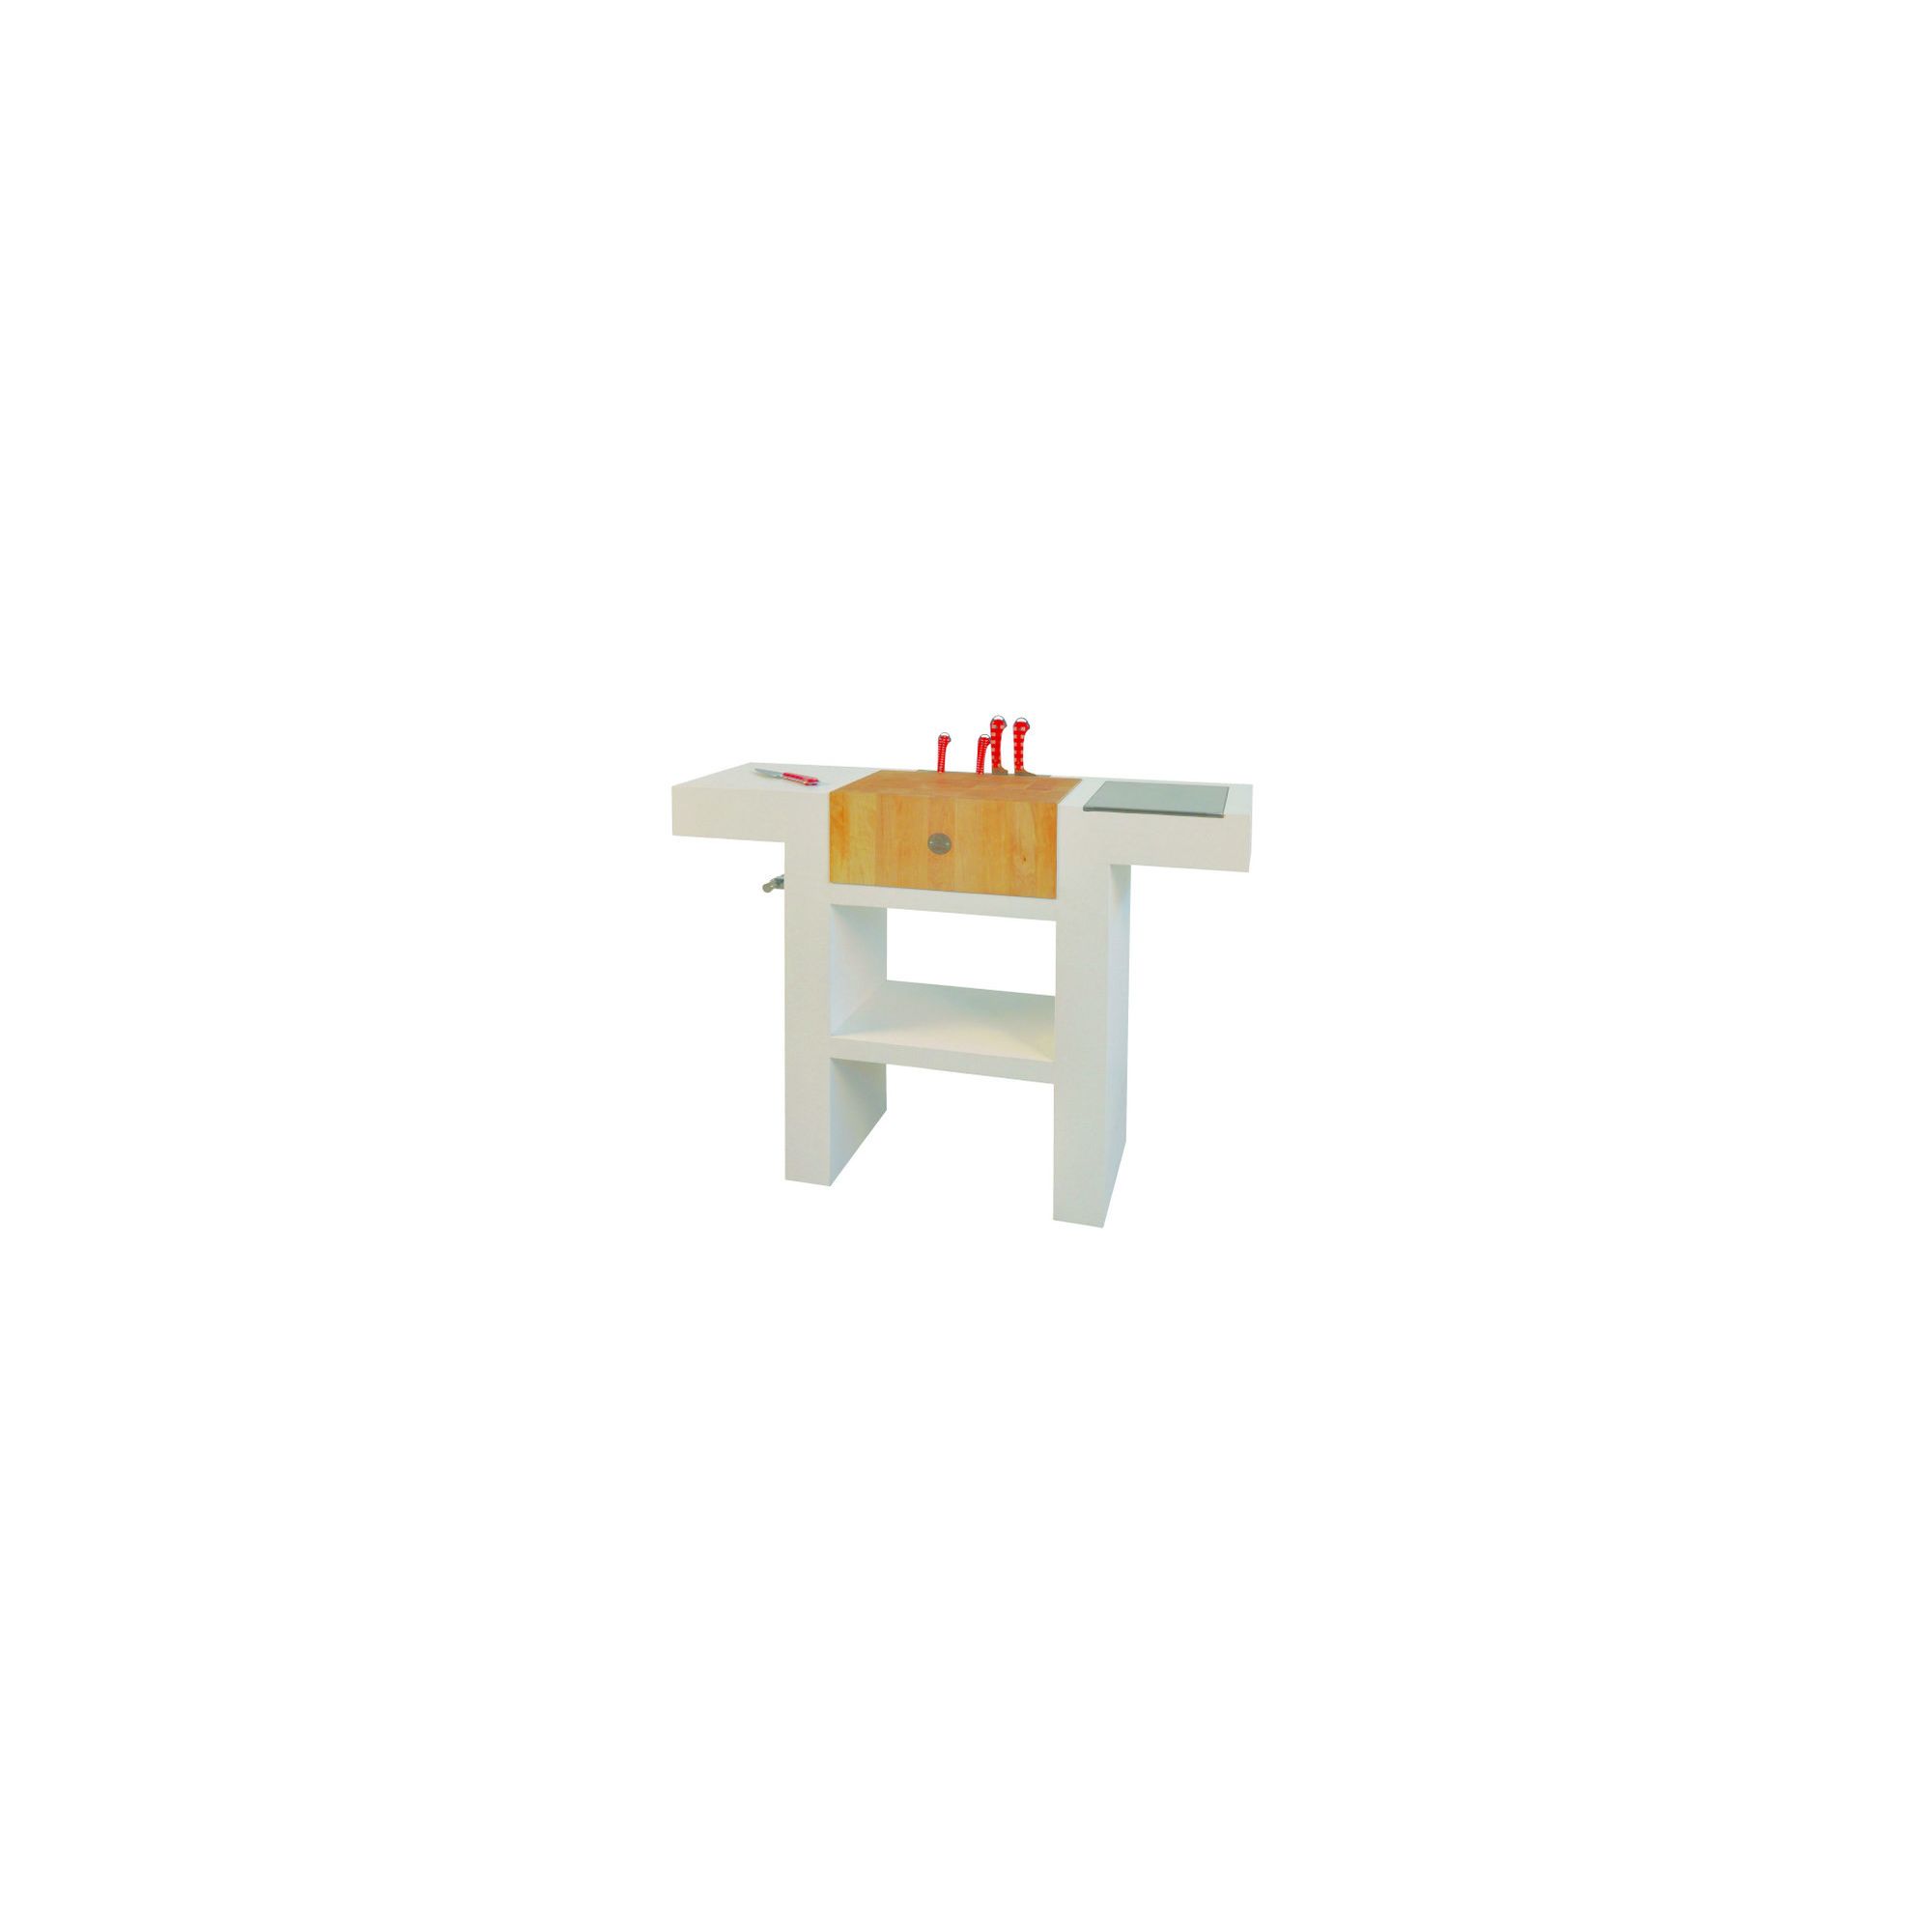 Chabret Console Block by MC Berger - 90cm X 100cm X 40cm at Tesco Direct